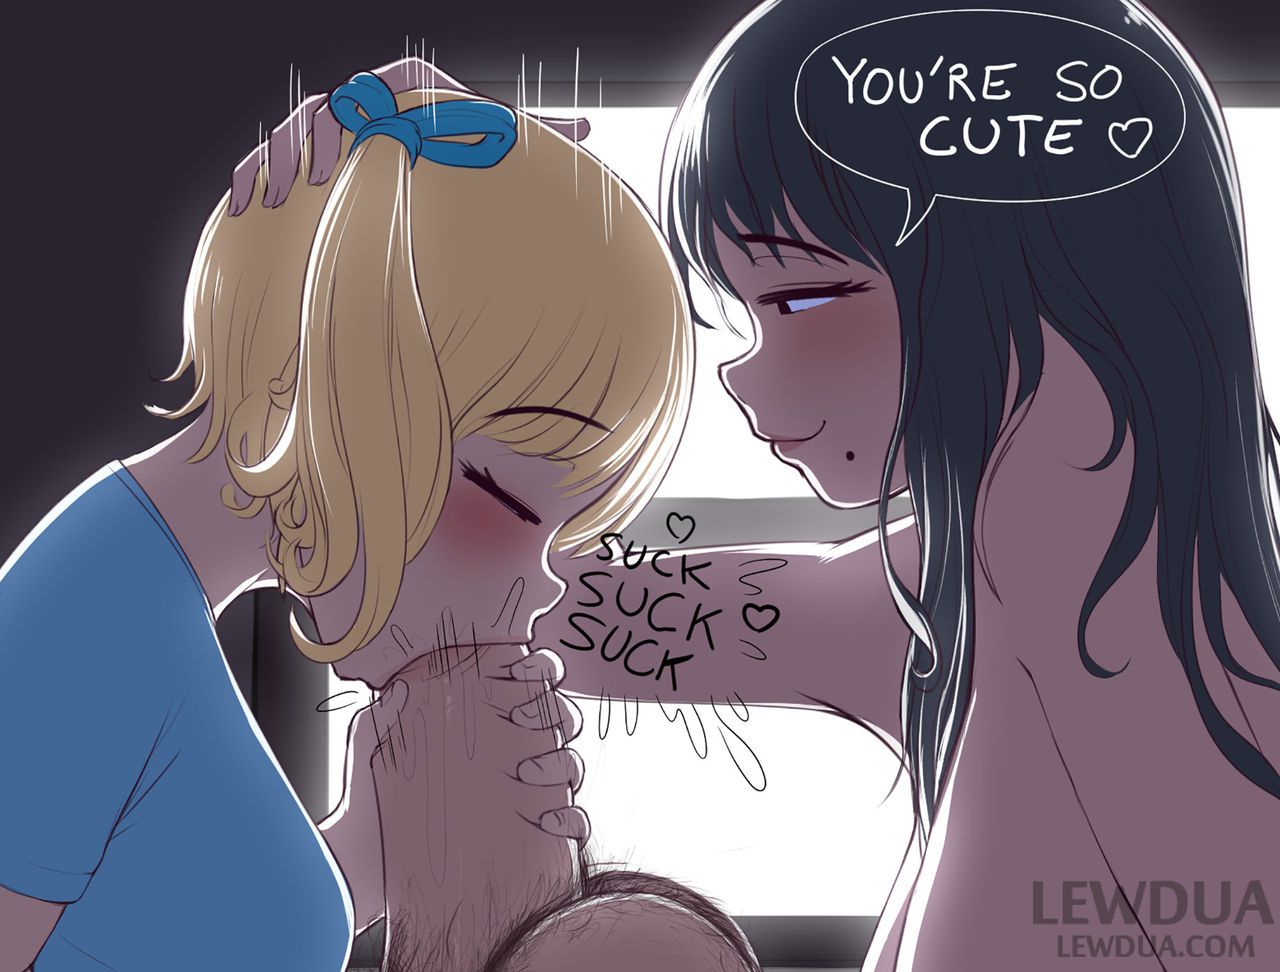 [Lewdua] Love is Sharing - Nessie and Alison 46